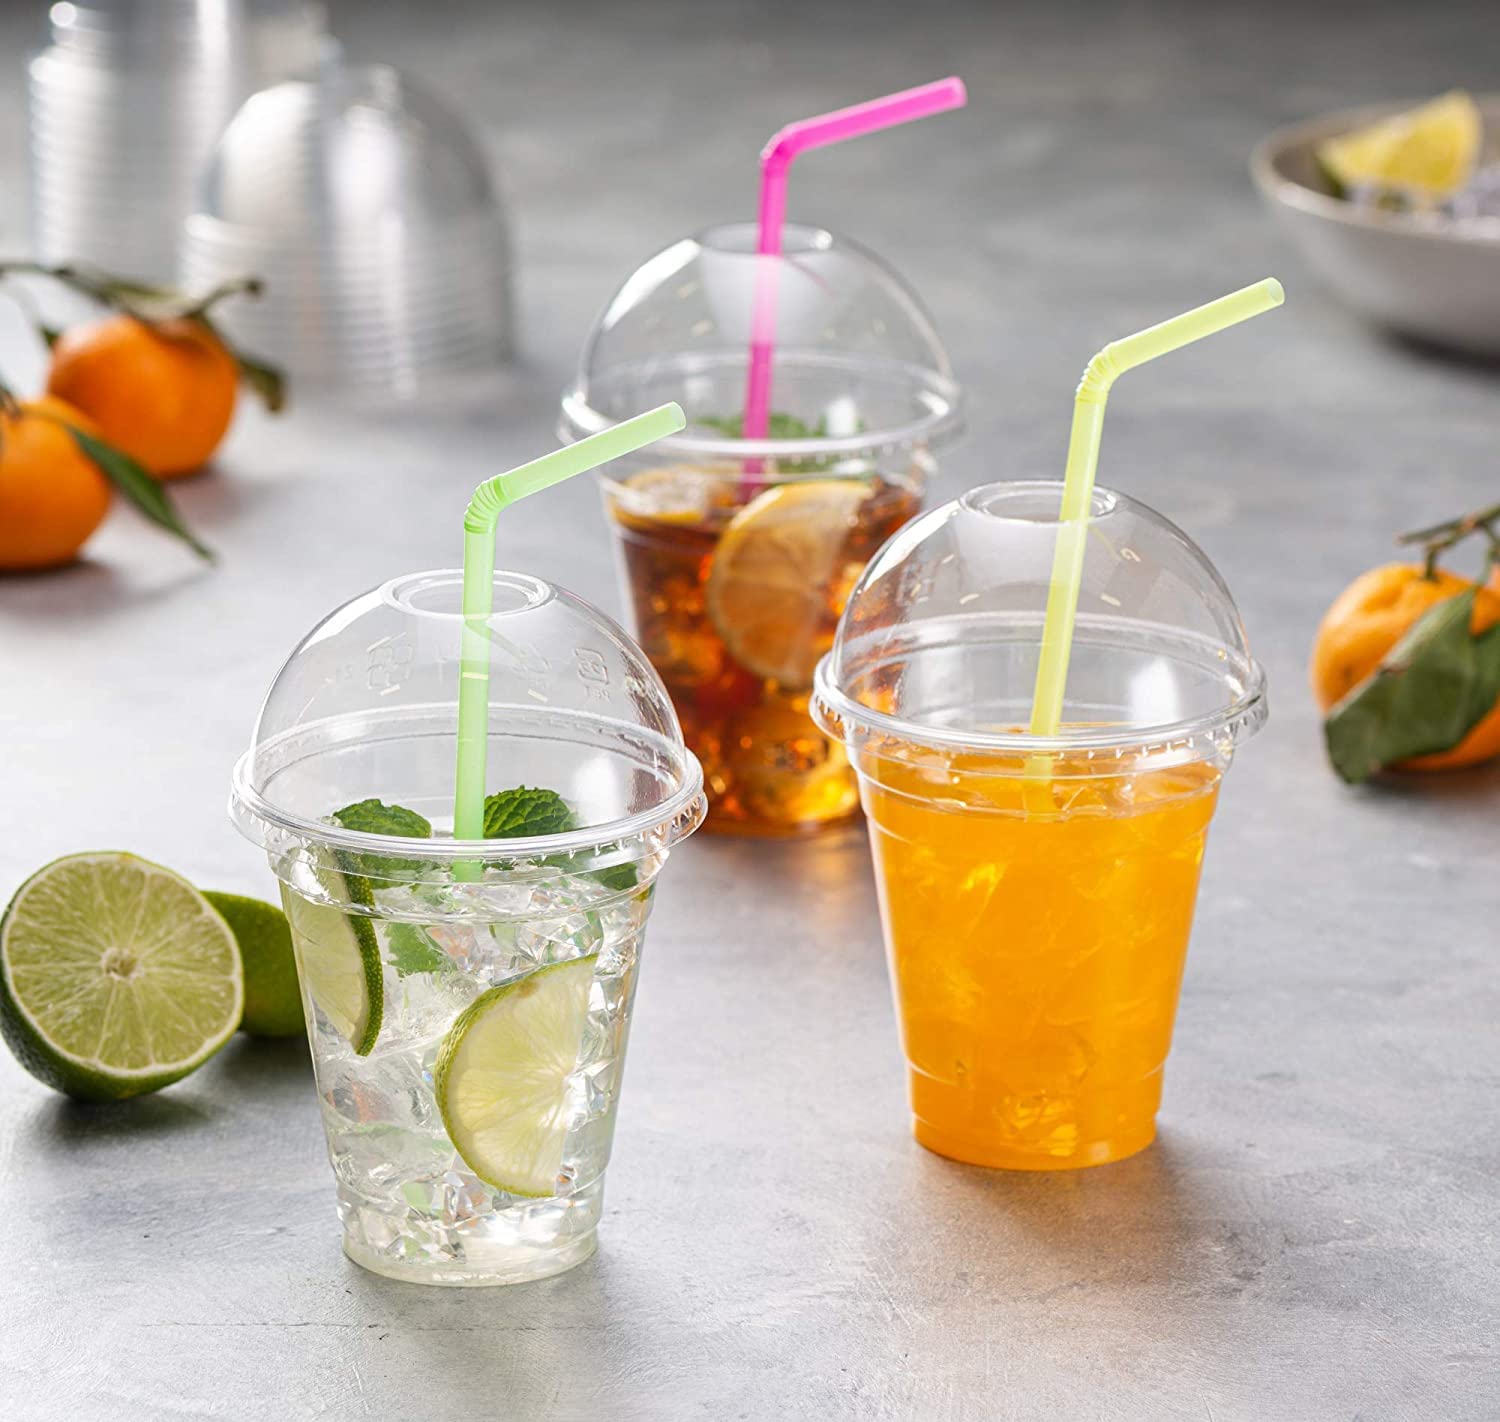 Crystal Clear Disposable Plastic Cups 16 oz 100 sets - Cups with Round Lids & Colorful Straws